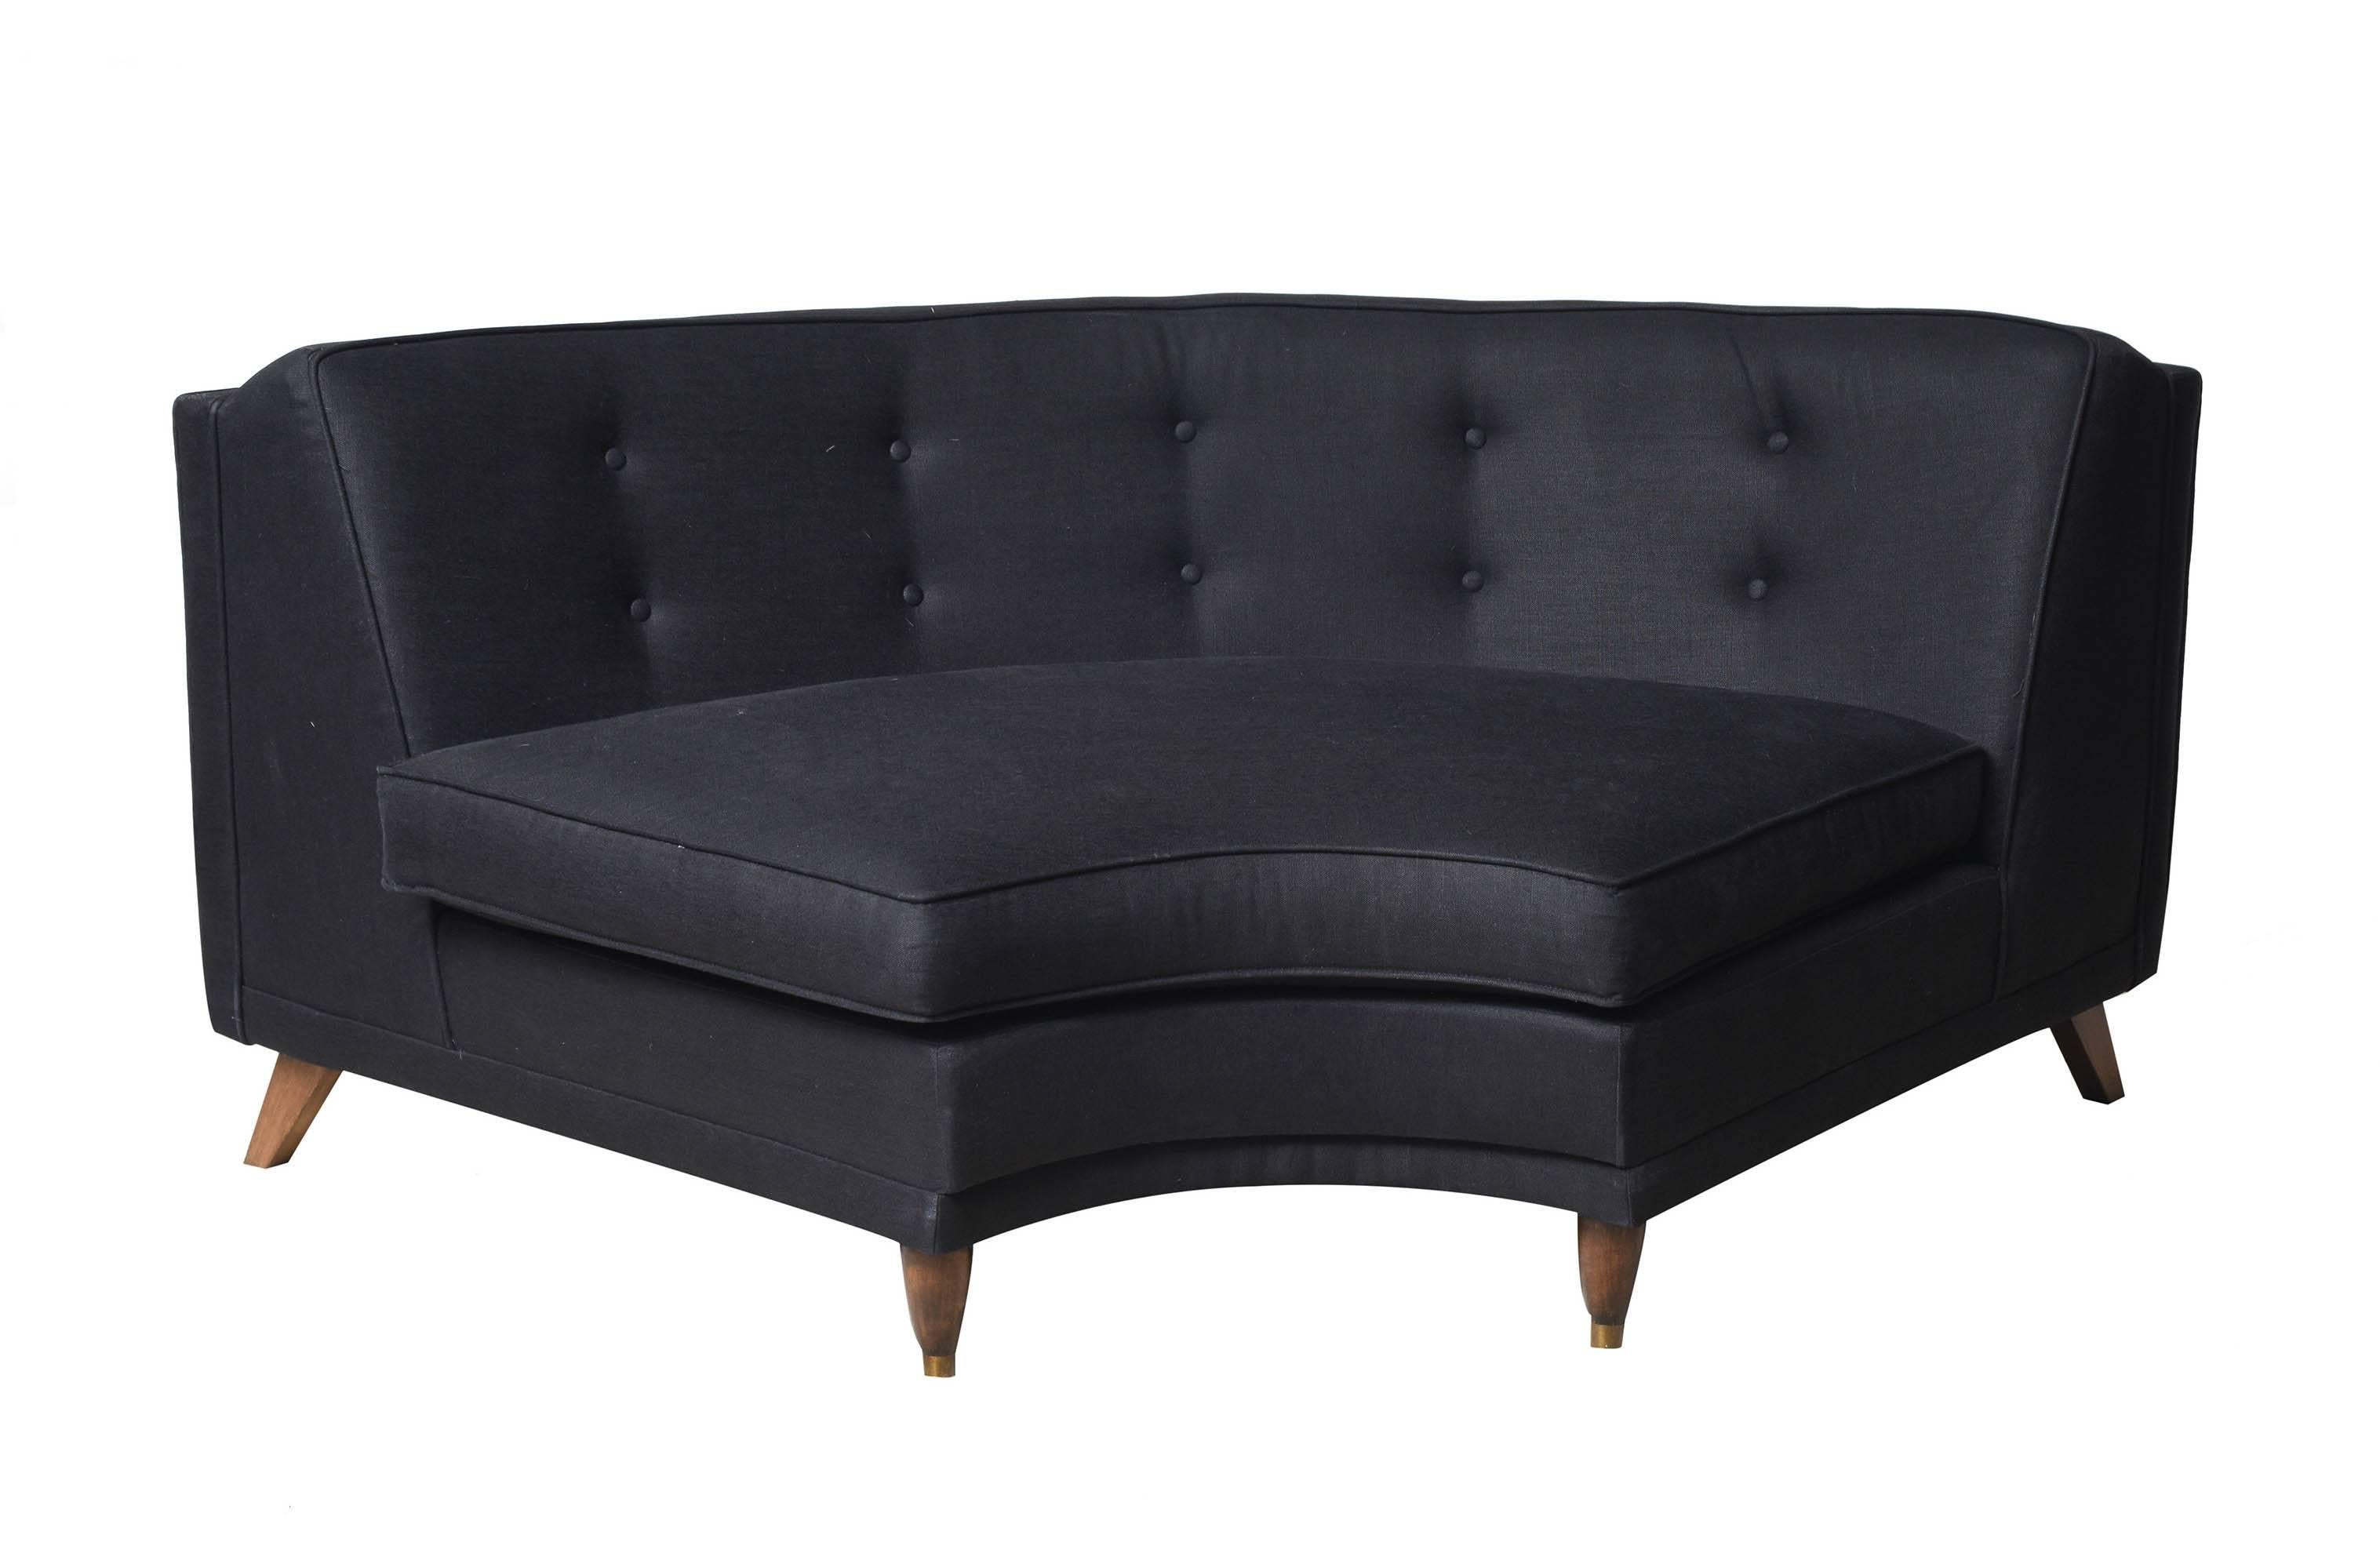 Harvey Probber three decomposable pieces sofa.
It has been completely restored and the upholstered with a Aura outdoor fabric.

Measurements specification is necessary:
Twins parts (the straight two): 130 cm W, 67 cm H and 90 cm D;
The